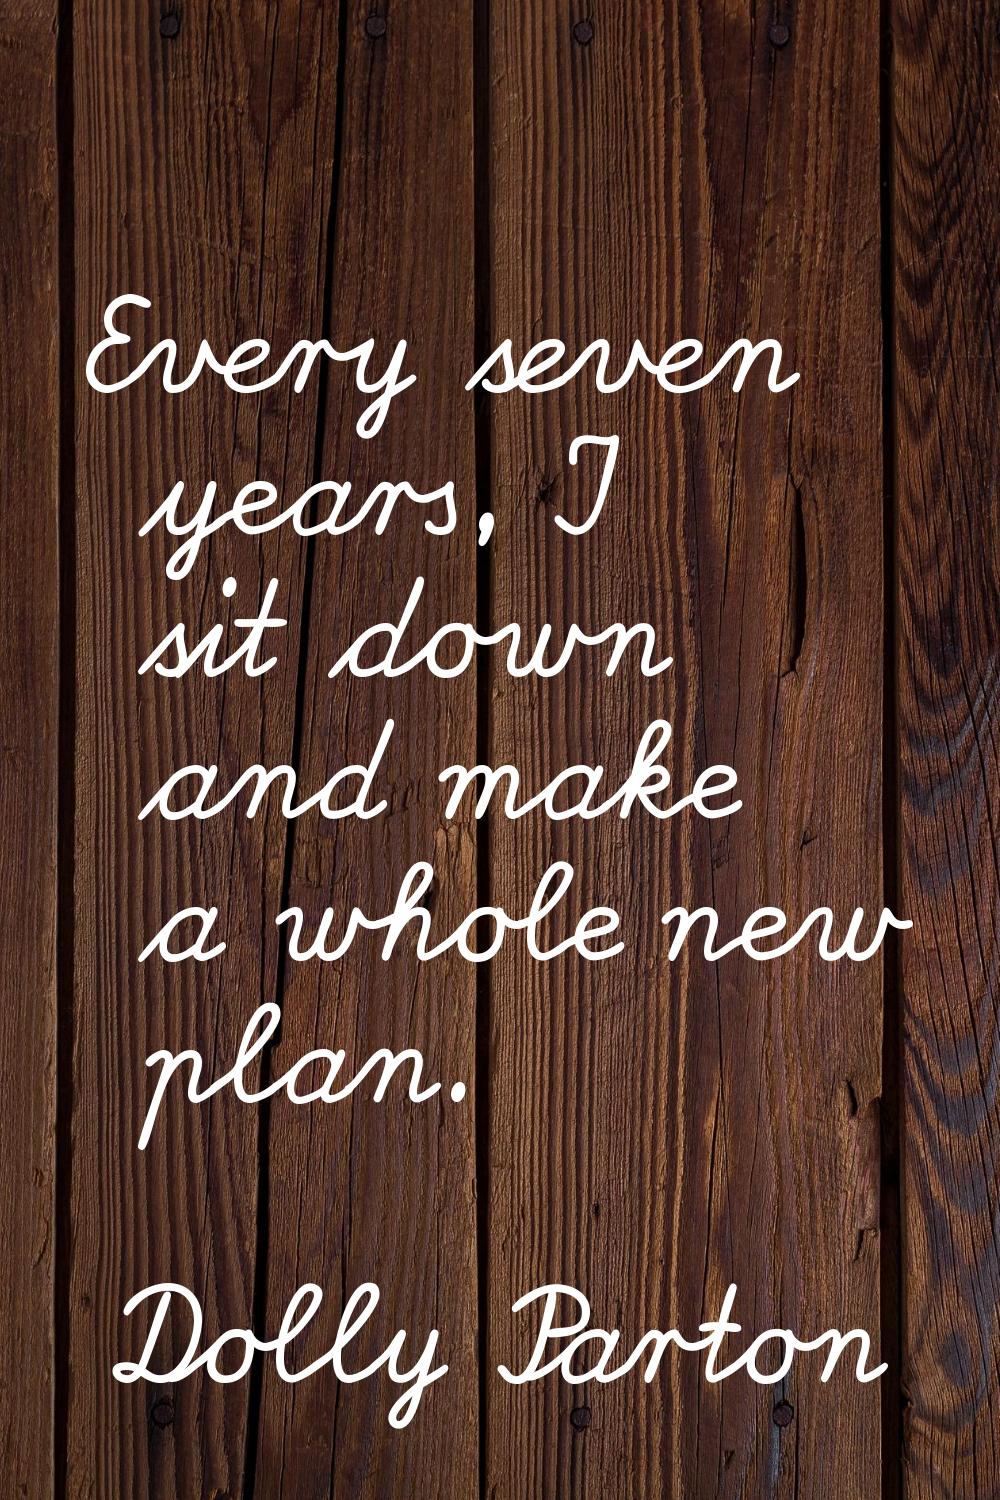 Every seven years, I sit down and make a whole new plan.